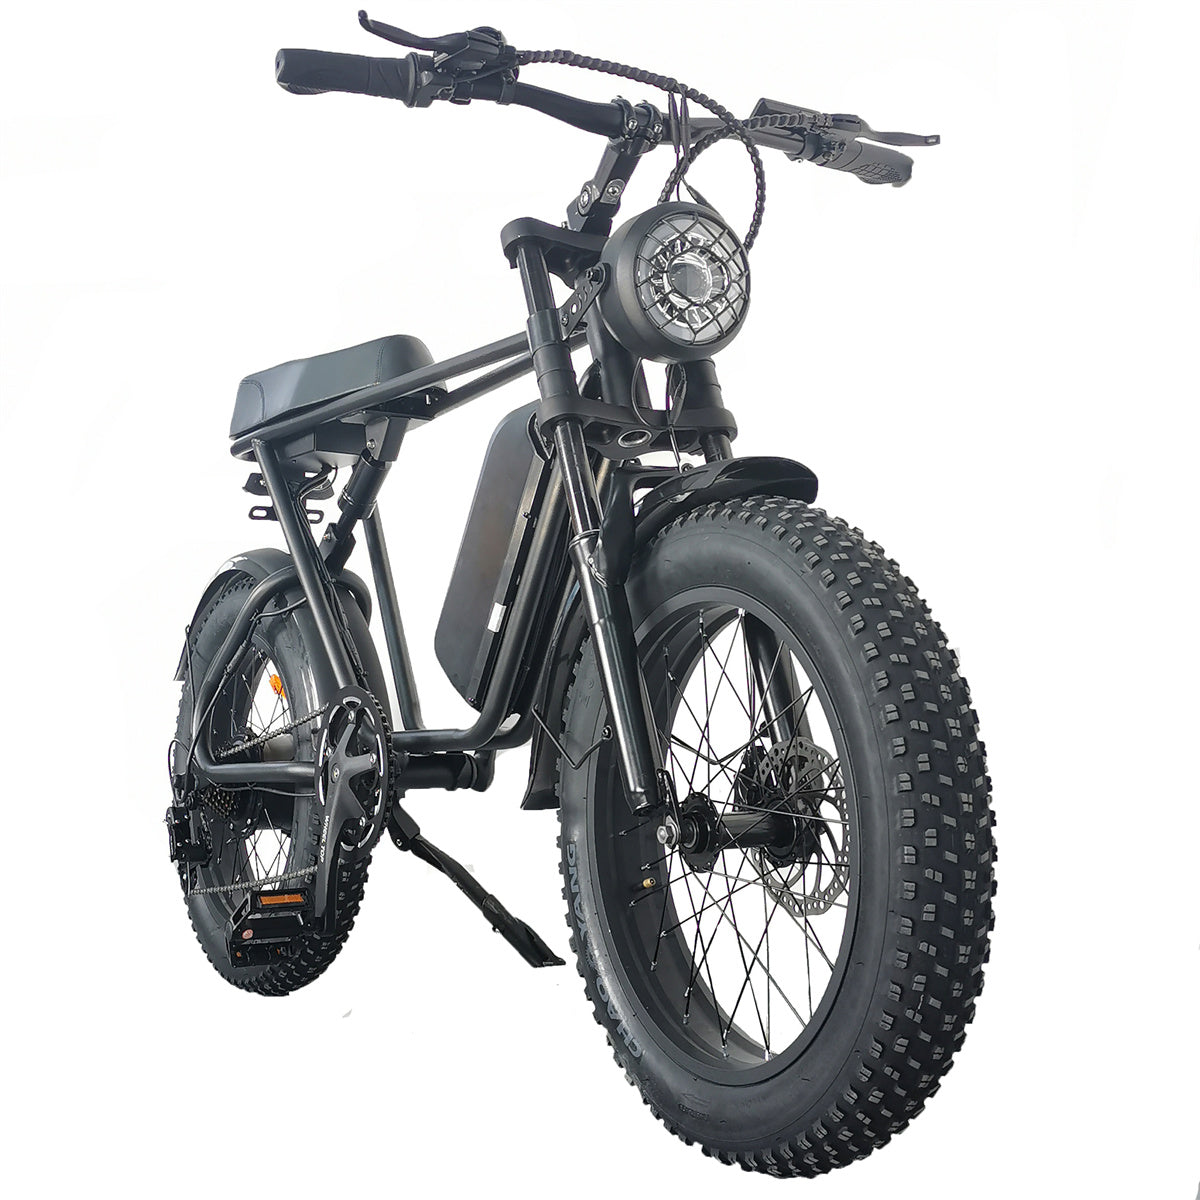 ZonDoo ZDBK01 E-bike 1000W Electric Bicycle 35MPH with 20Inch Fat Tyres